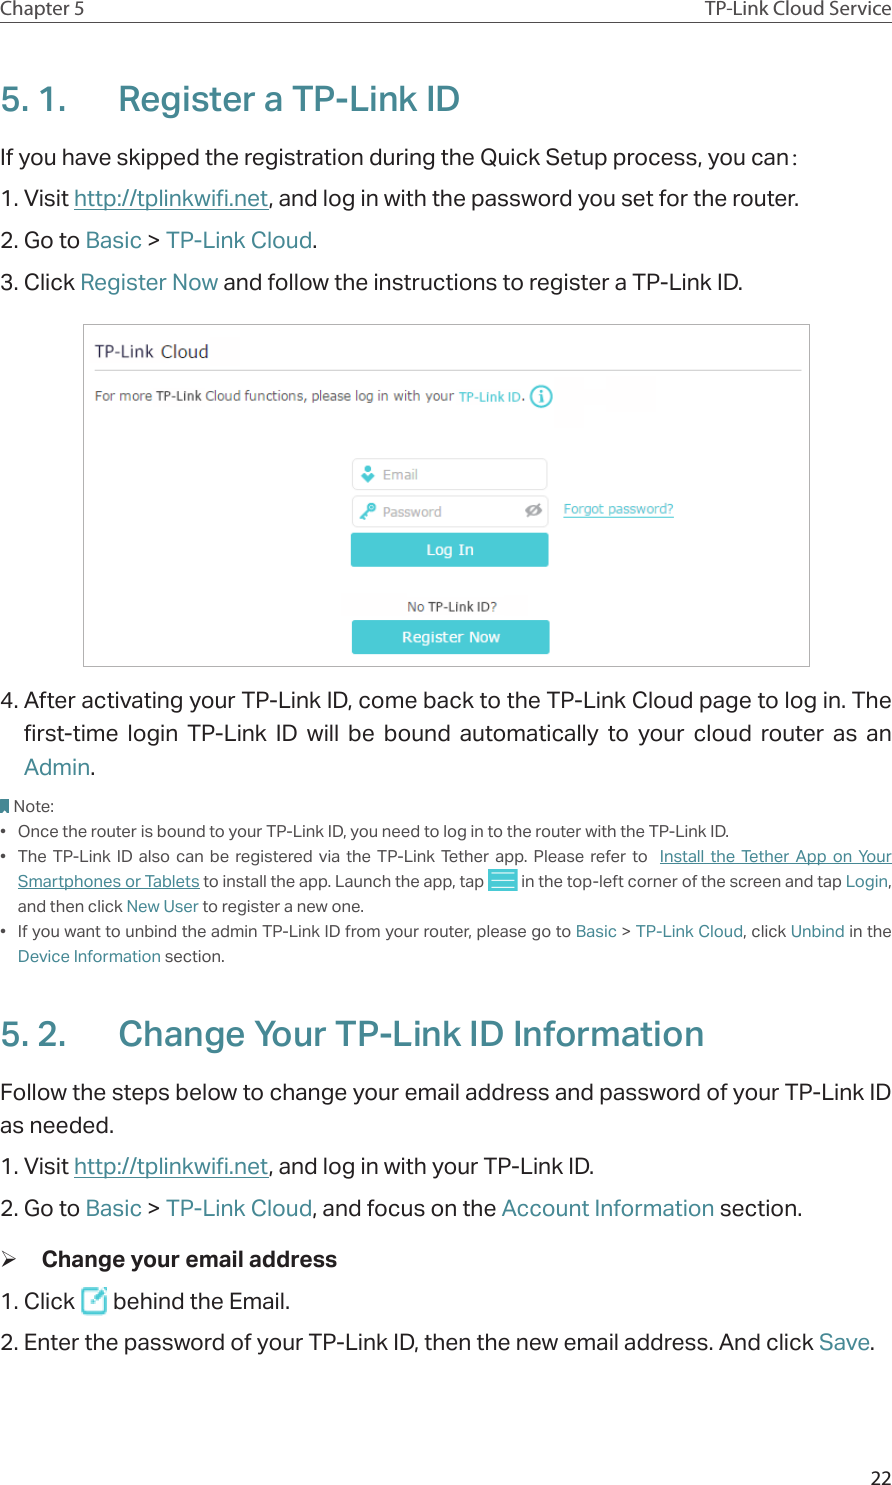 22Chapter 5 TP-Link Cloud Service5. 1.  Register a TP-Link IDIf you have skipped the registration during the Quick Setup process, you can：1. Visit http://tplinkwifi.net, and log in with the password you set for the router.2. Go to Basic &gt; TP-Link Cloud.3. Click Register Now and follow the instructions to register a TP-Link ID.4. After activating your TP-Link ID, come back to the TP-Link Cloud page to log in. The first-time login TP-Link ID will be bound automatically to your cloud router as an Admin.Note:•  Once the router is bound to your TP-Link ID, you need to log in to the router with the TP-Link ID. •  The TP-Link ID also can be registered via the TP-Link Tether app. Please refer to  Install the Tether App on Your Smartphones or Tablets to install the app. Launch the app, tap   in the top-left corner of the screen and tap Login, and then click New User to register a new one.•  If you want to unbind the admin TP-Link ID from your router, please go to Basic &gt; TP-Link Cloud, click Unbind in the Device Information section.5. 2.  Change Your TP-Link ID InformationFollow the steps below to change your email address and password of your TP-Link ID as needed.1. Visit http://tplinkwifi.net, and log in with your TP-Link ID.2. Go to Basic &gt; TP-Link Cloud, and focus on the Account Information section. ¾Change your email address1. Click   behind the Email.2. Enter the password of your TP-Link ID, then the new email address. And click Save.